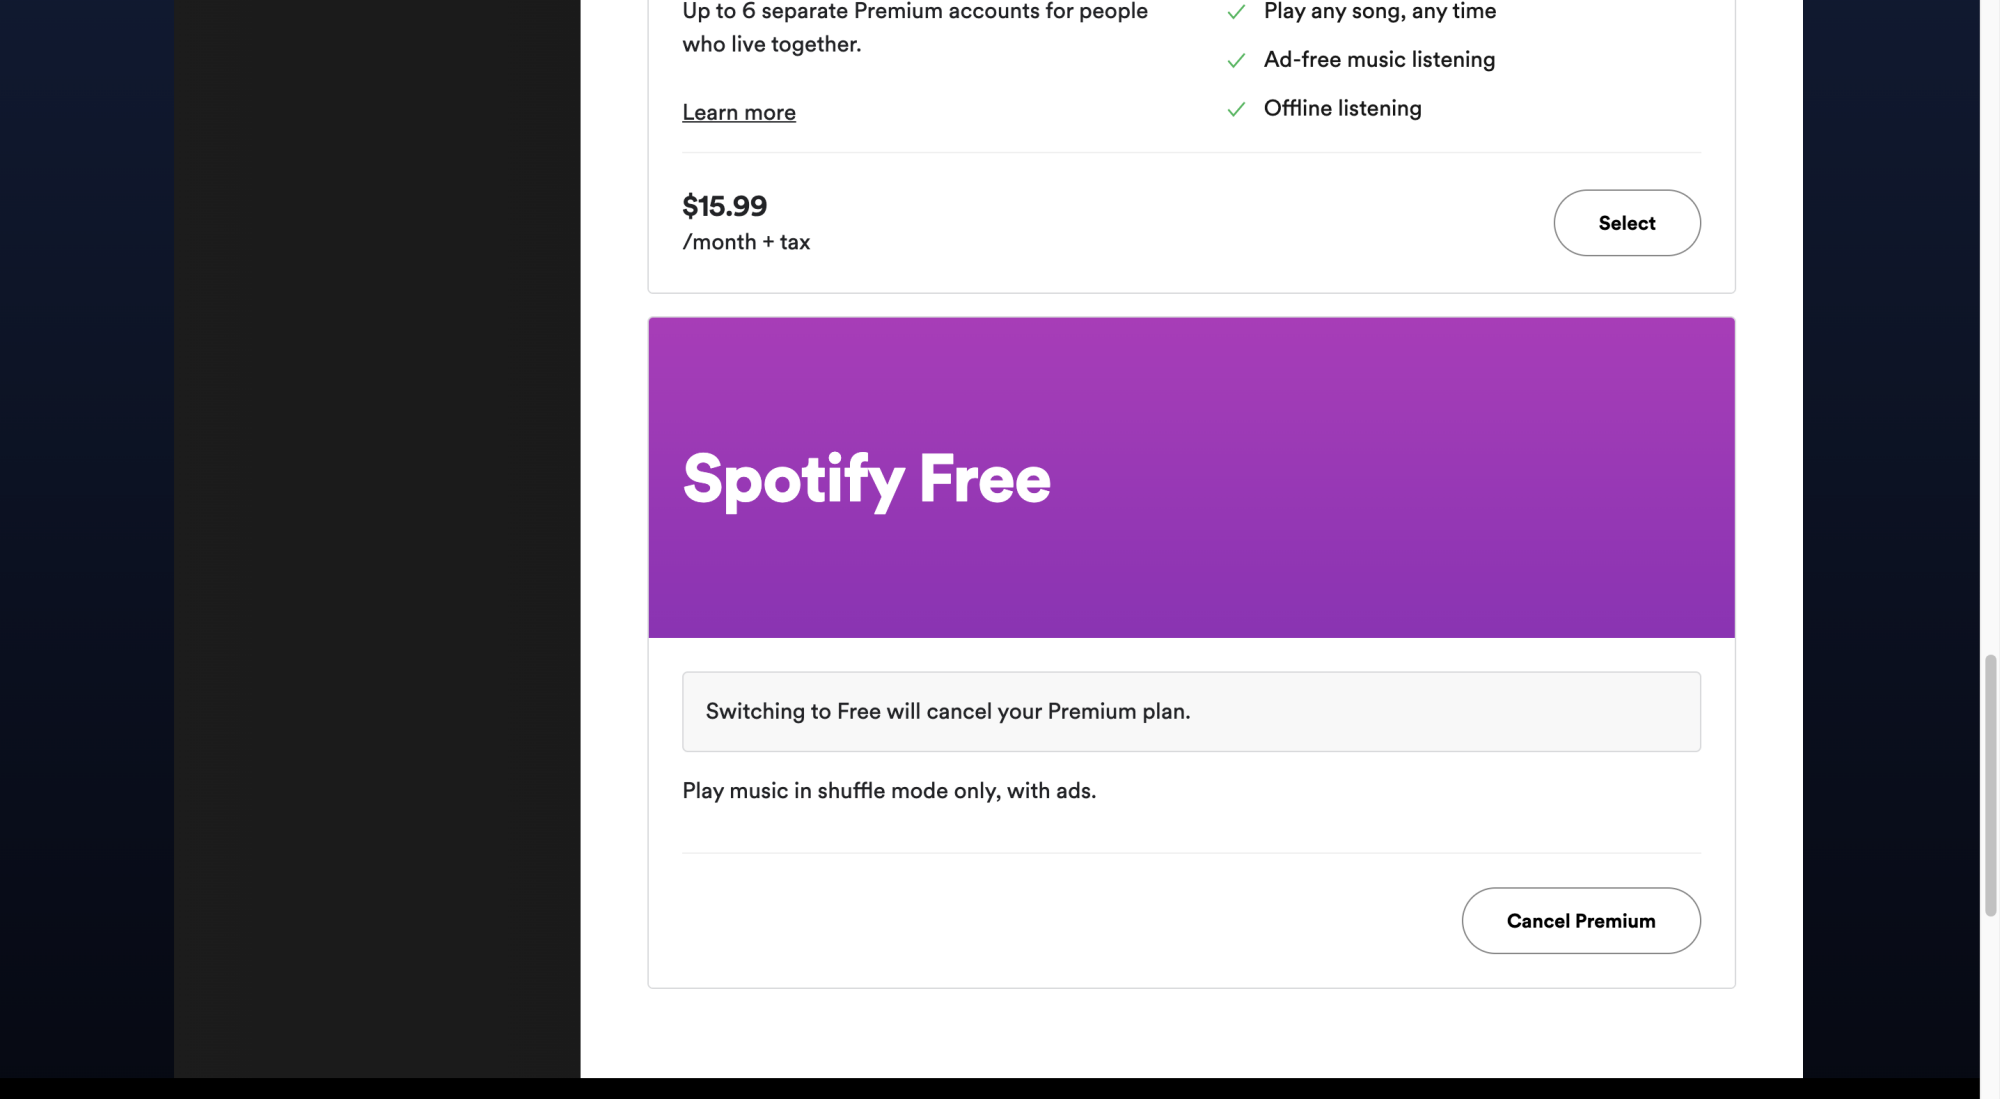 Screenshot of Spotify's subscription plans focused on "Spotify Free."